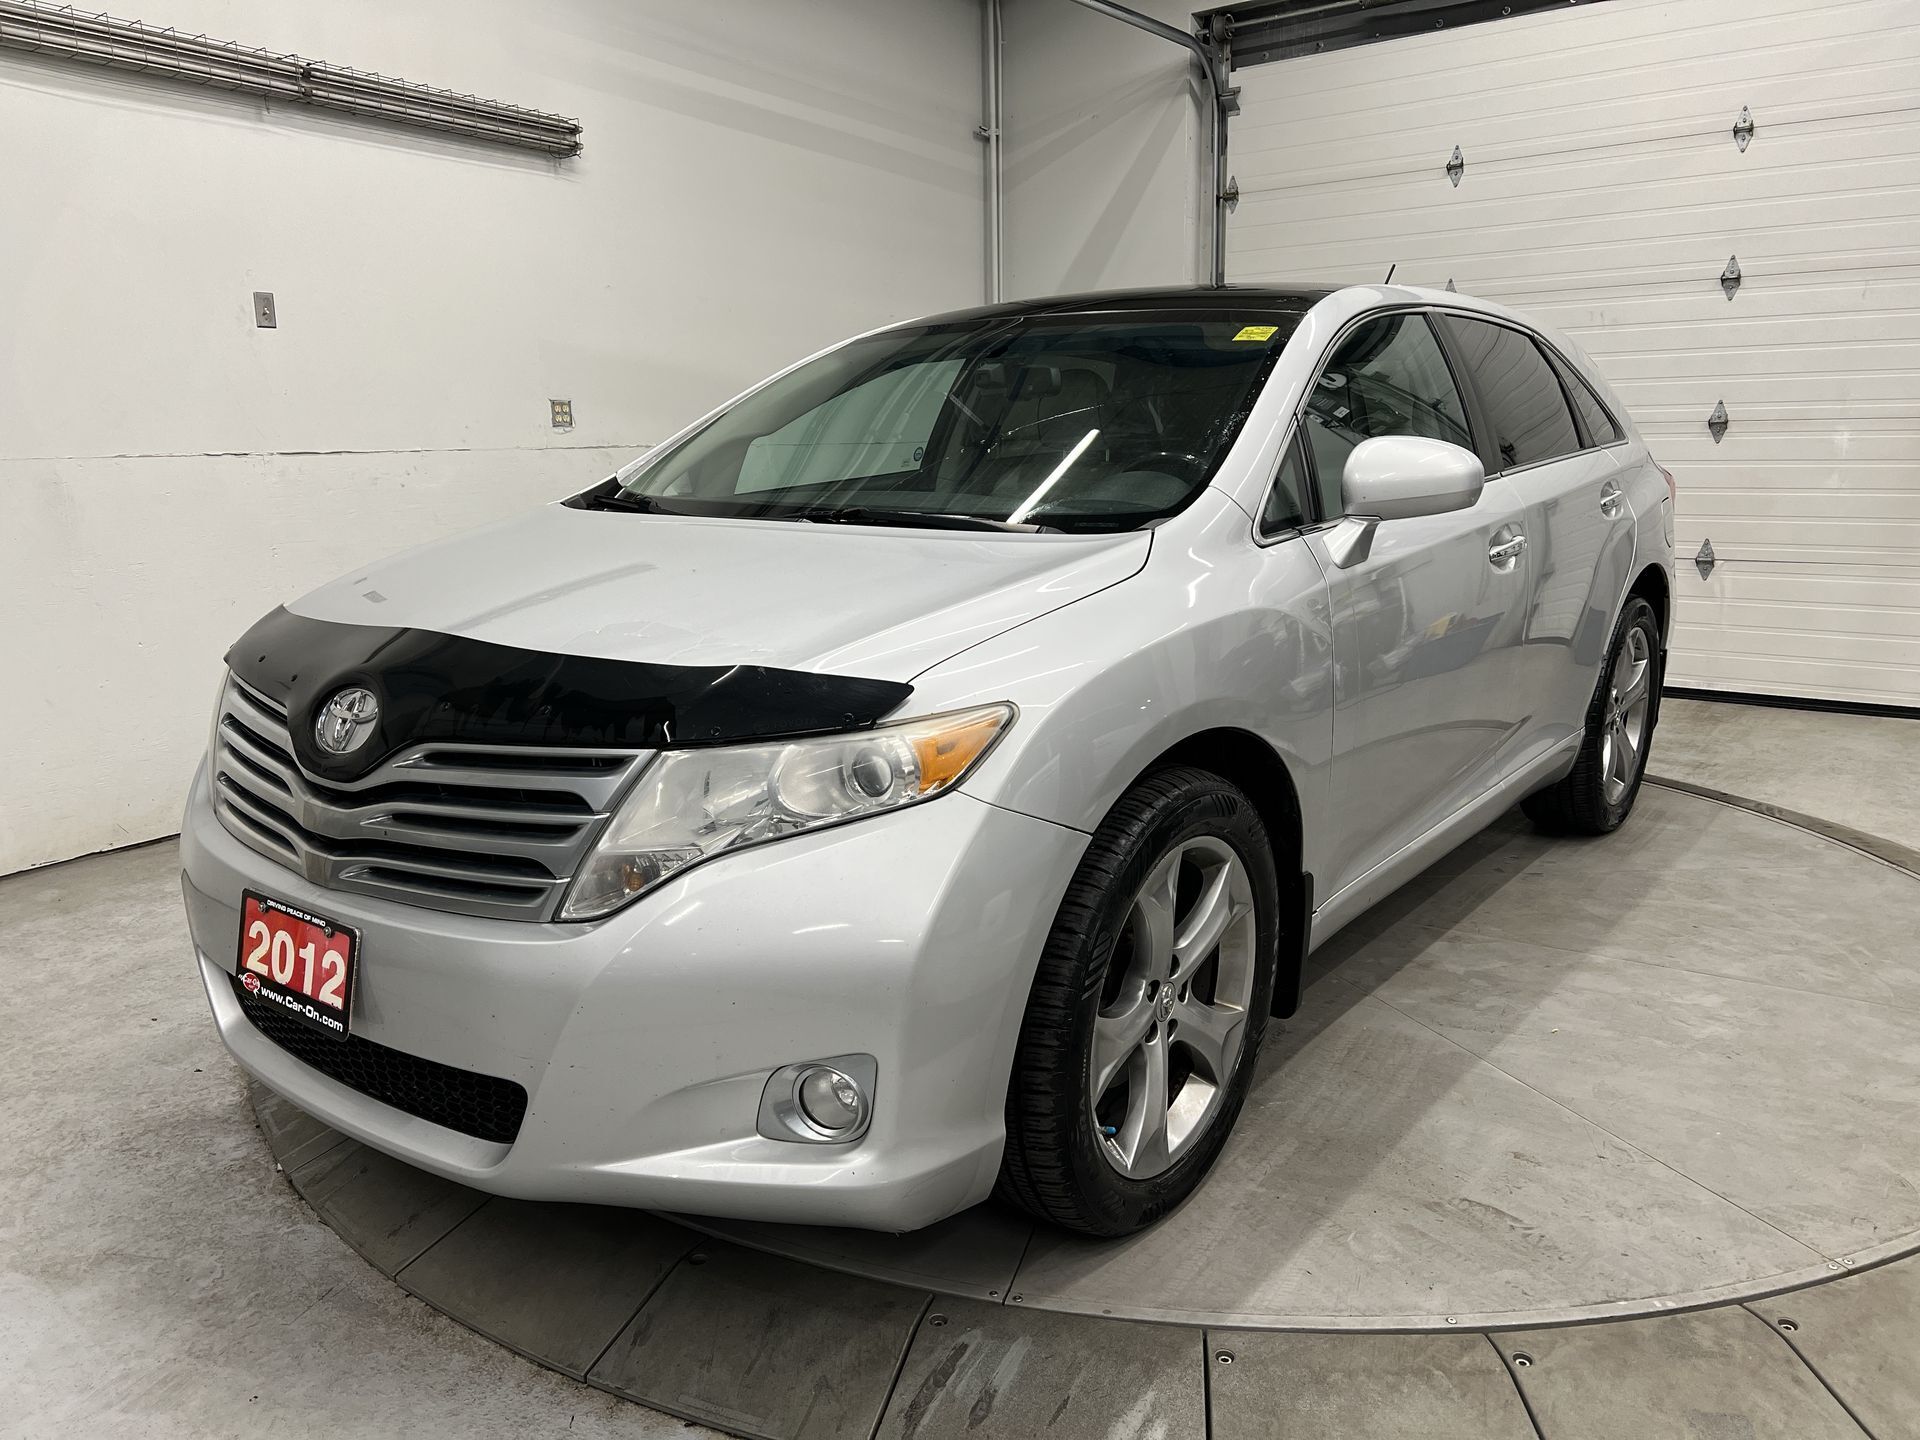 2012 Toyota Venza TOURING V6 AWD | PANO ROOF |HTD LEATHER |CERTIFIED